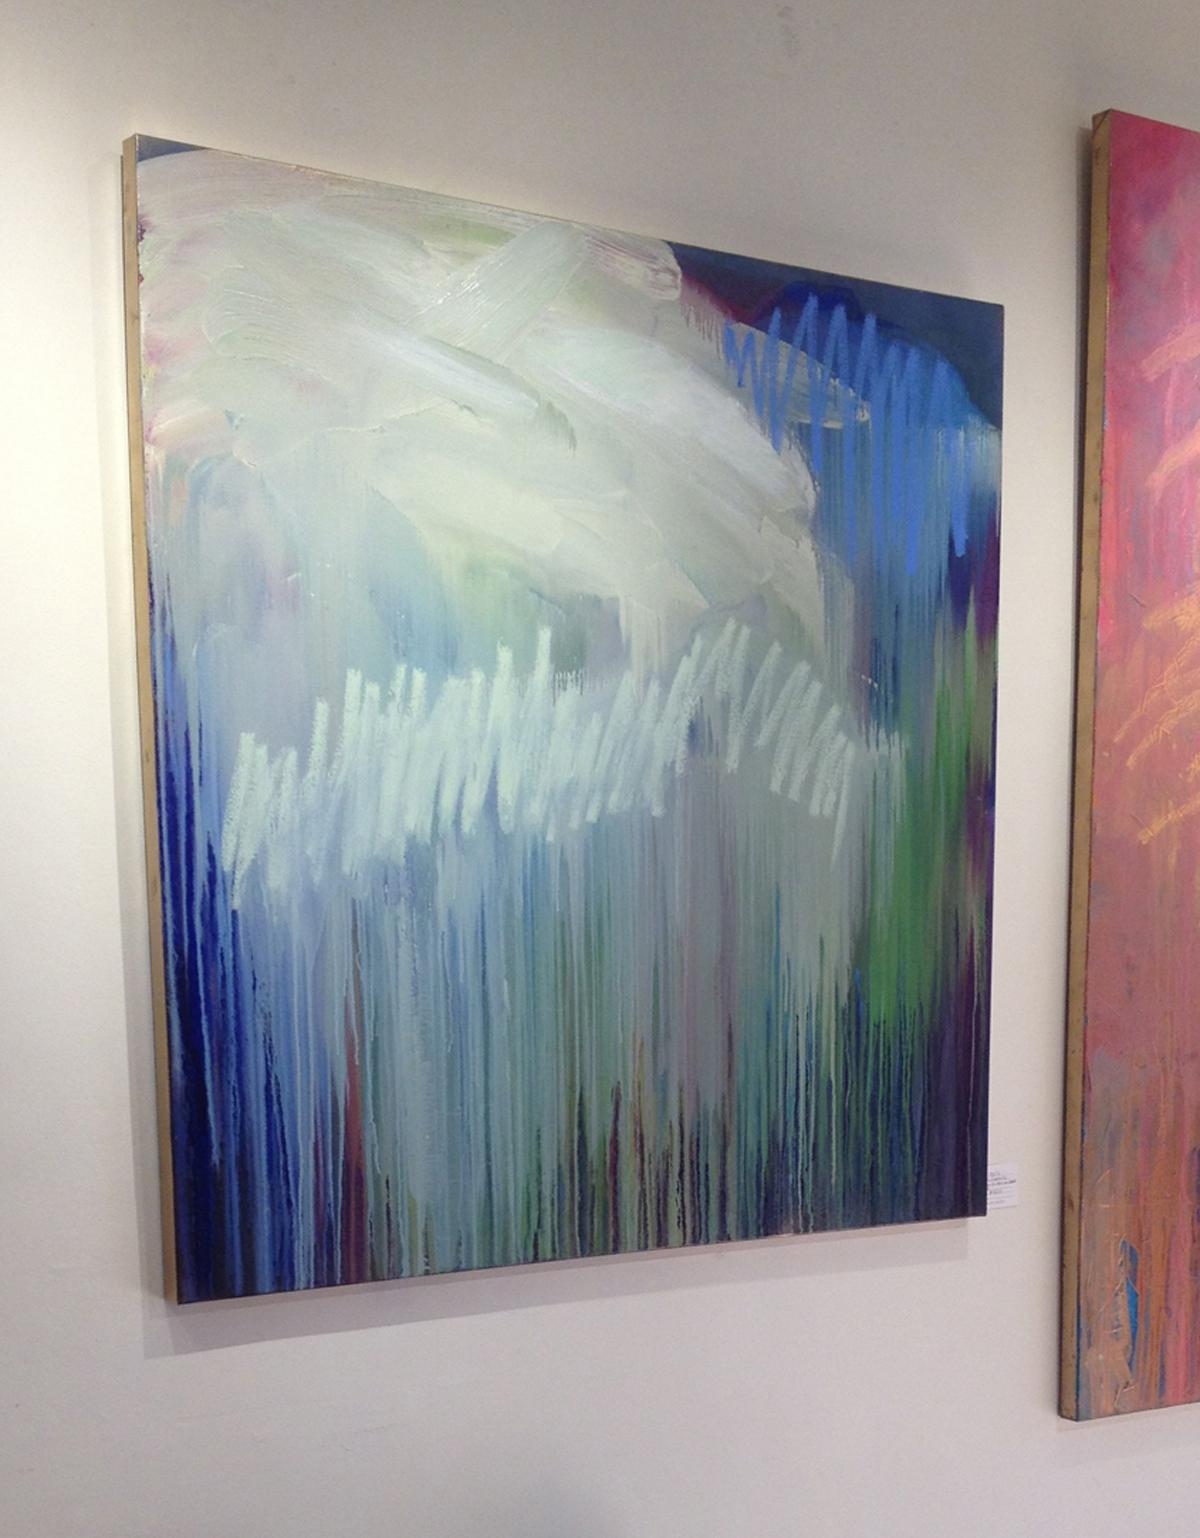 This abstract painting by Teodora Guererra features the artist's drip technique, dripping varying colors of paint down the painting, with white and blue drawn marks and broad paint strokes at the top of the composition. The painting is made on